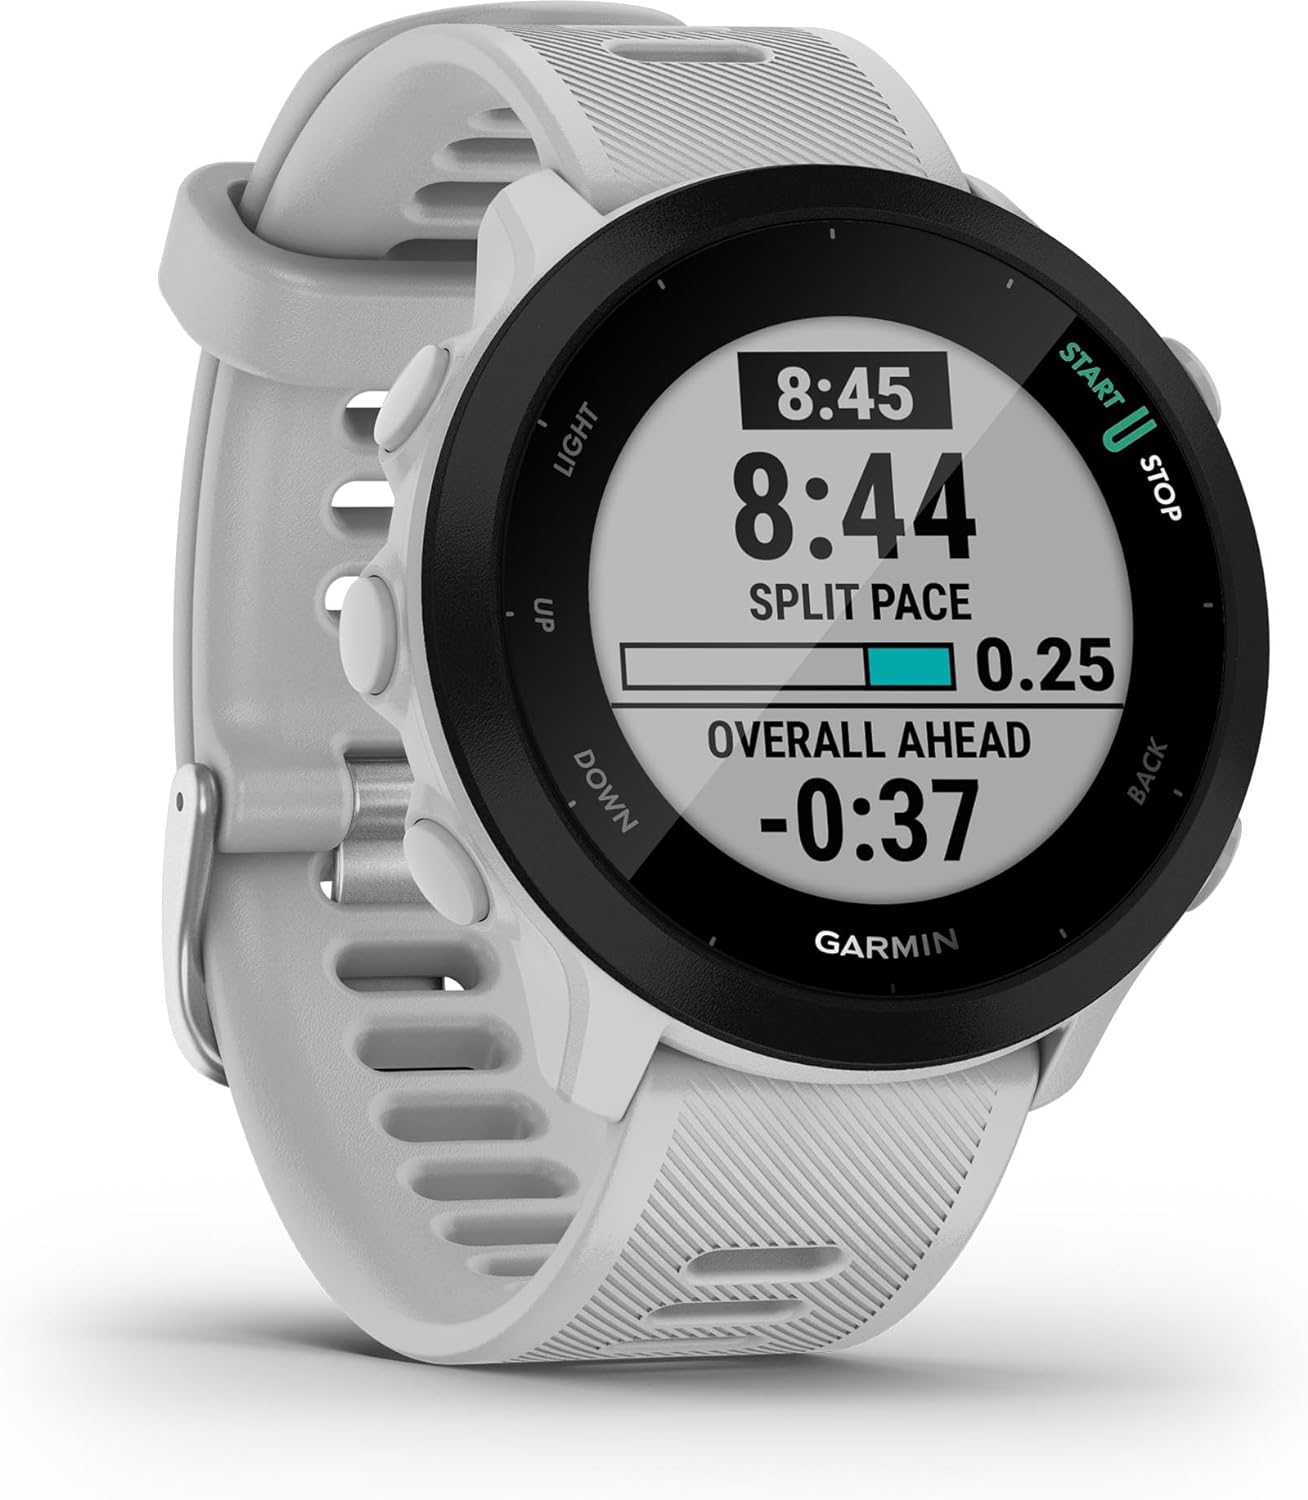 Valuable Stunning Potential with the Garmin Forerunner 55 Watch.